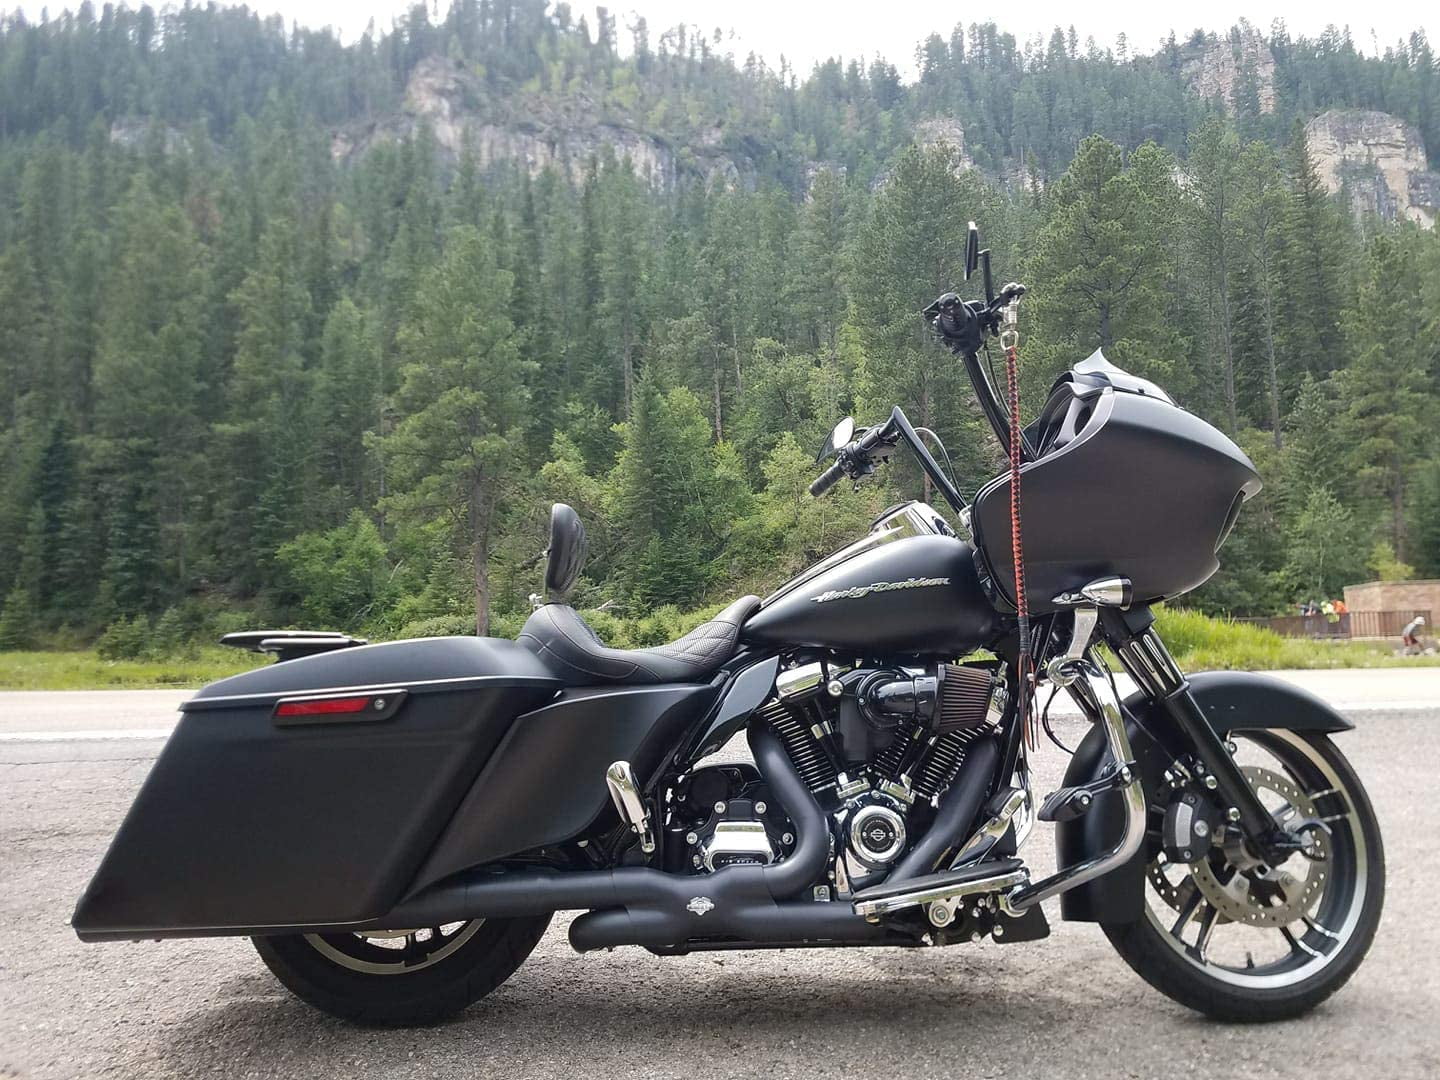 2015 Special Road Glide For Sale - Harley-Davidson Motorcycles - Cycle  Trader